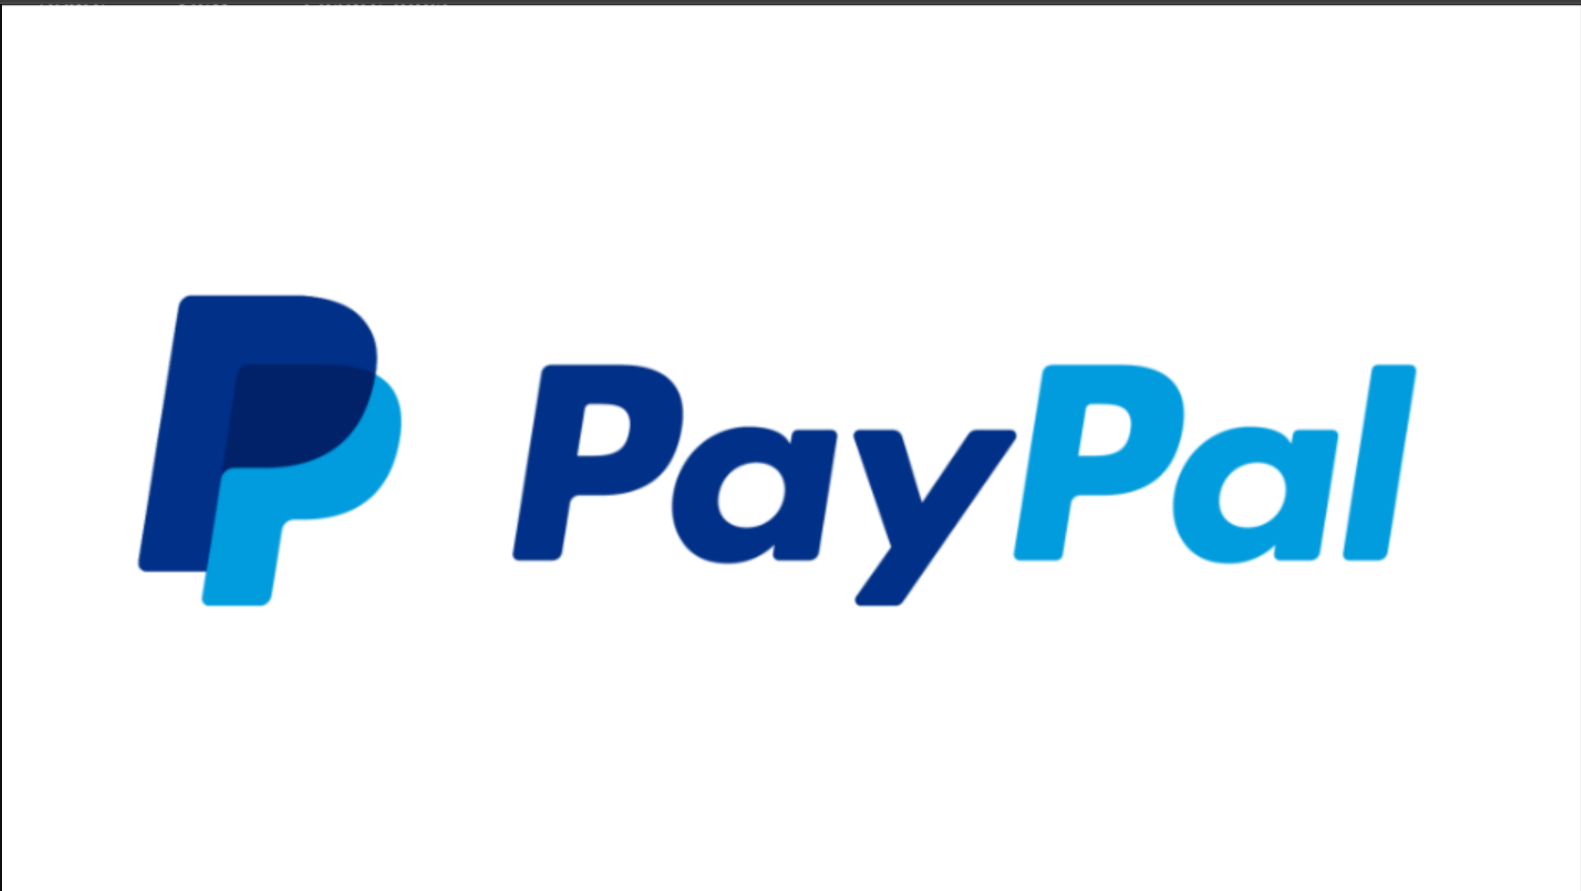 149617PAYPAL(CY-CY) 8$